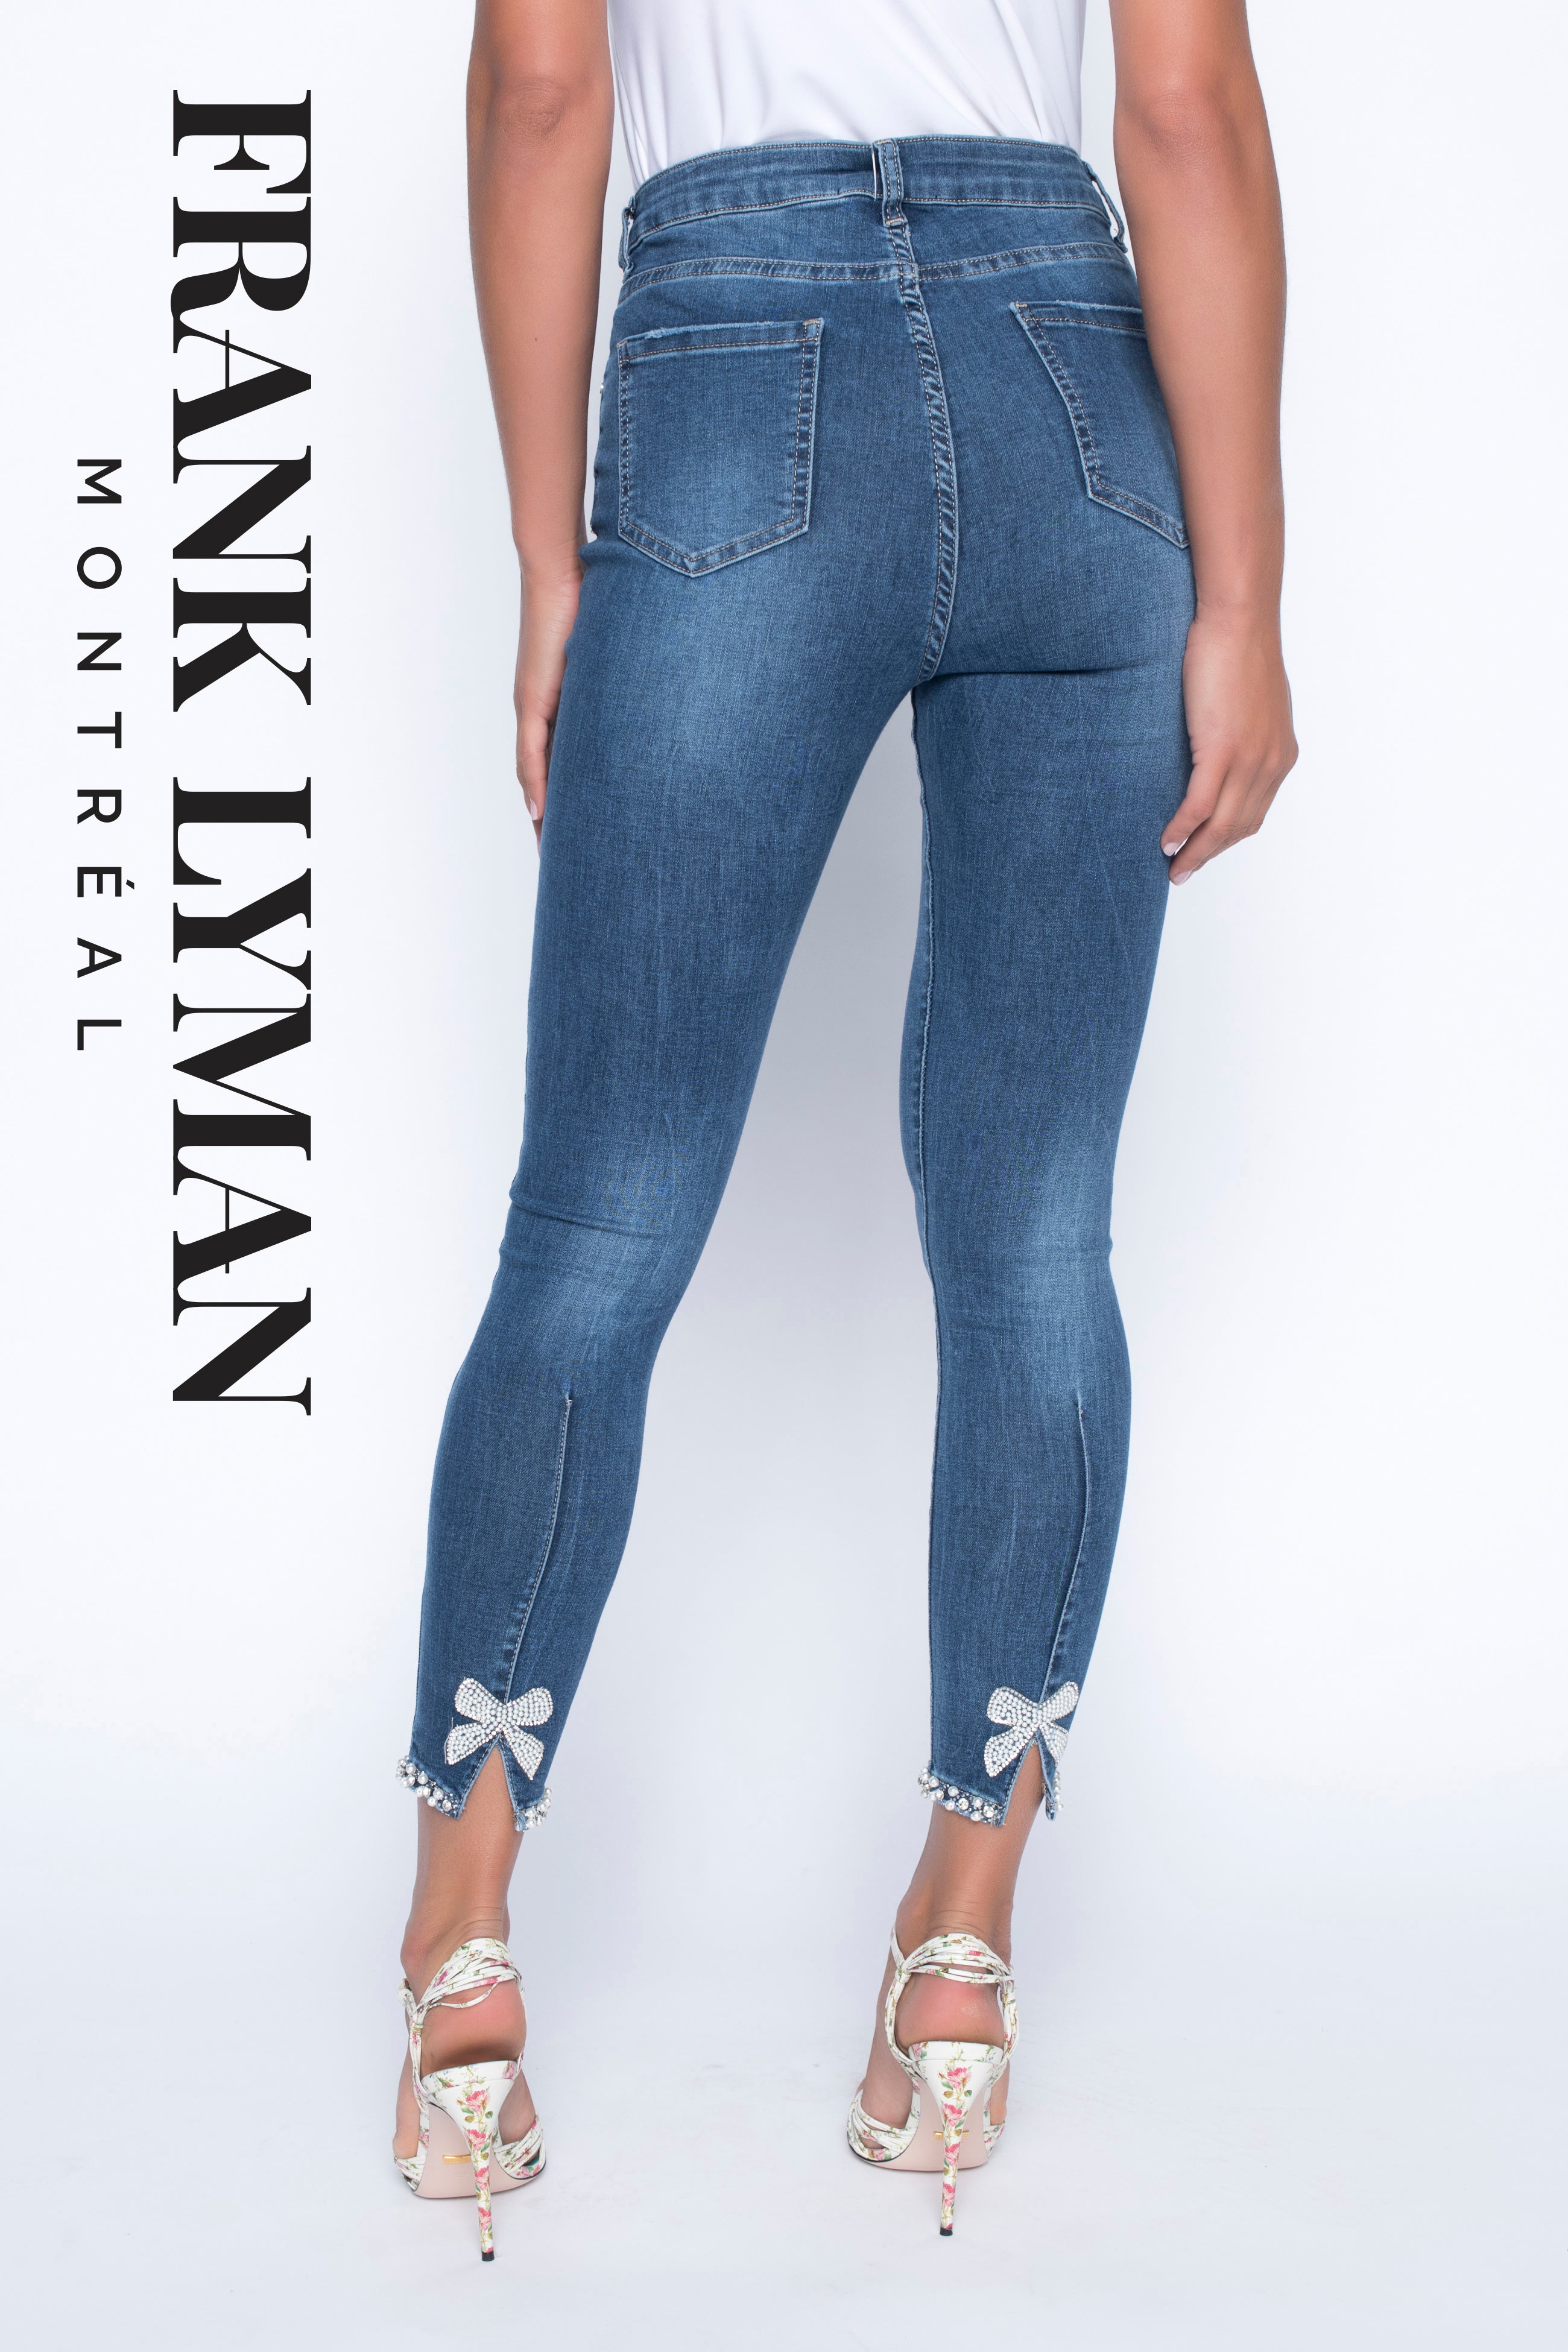 Frank Lyman Montreal Pearl Bow Jeans-Frank Lyman Montreal Pearl Jeans 